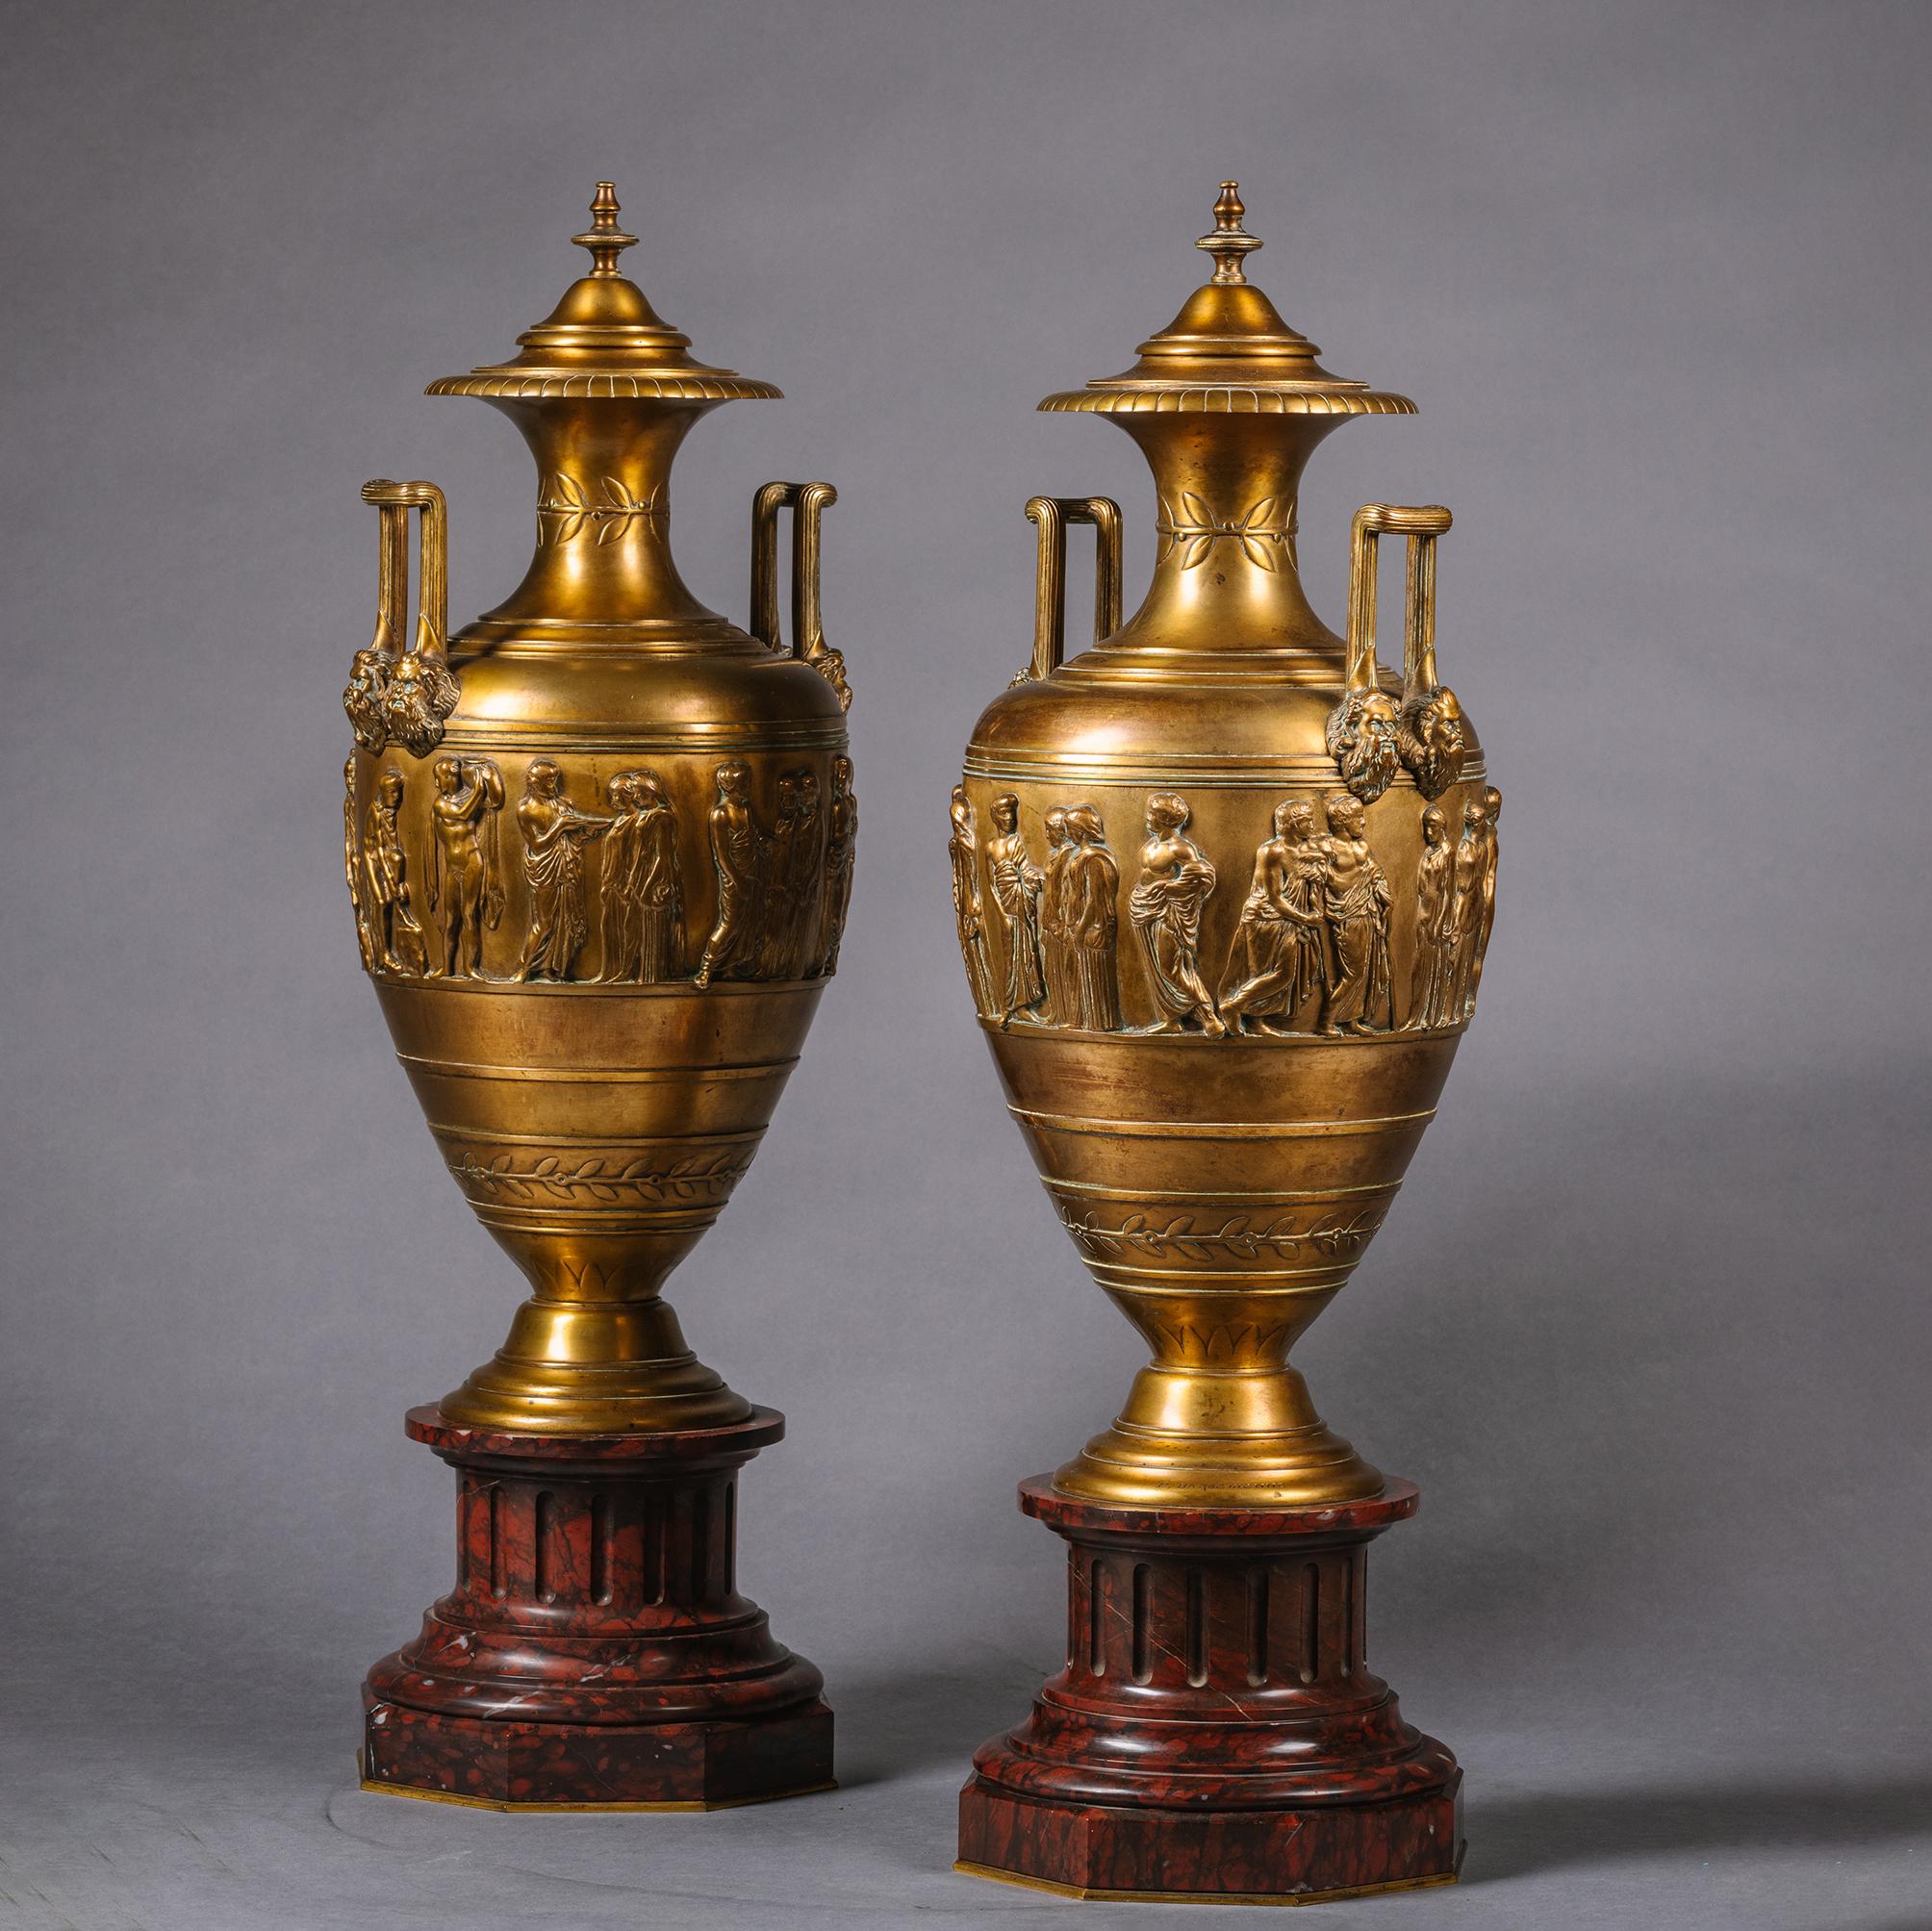 A Pair of Gilt-Bronze And Rouge Griotte Marble Vases and Covers. By Ferdinand Barbedienne, Paris. 

Designed in the Neo-Grec style these elegant vases stand atop Rouge Griotte marble plinths. Each vase has a fixed cover with finial above flared